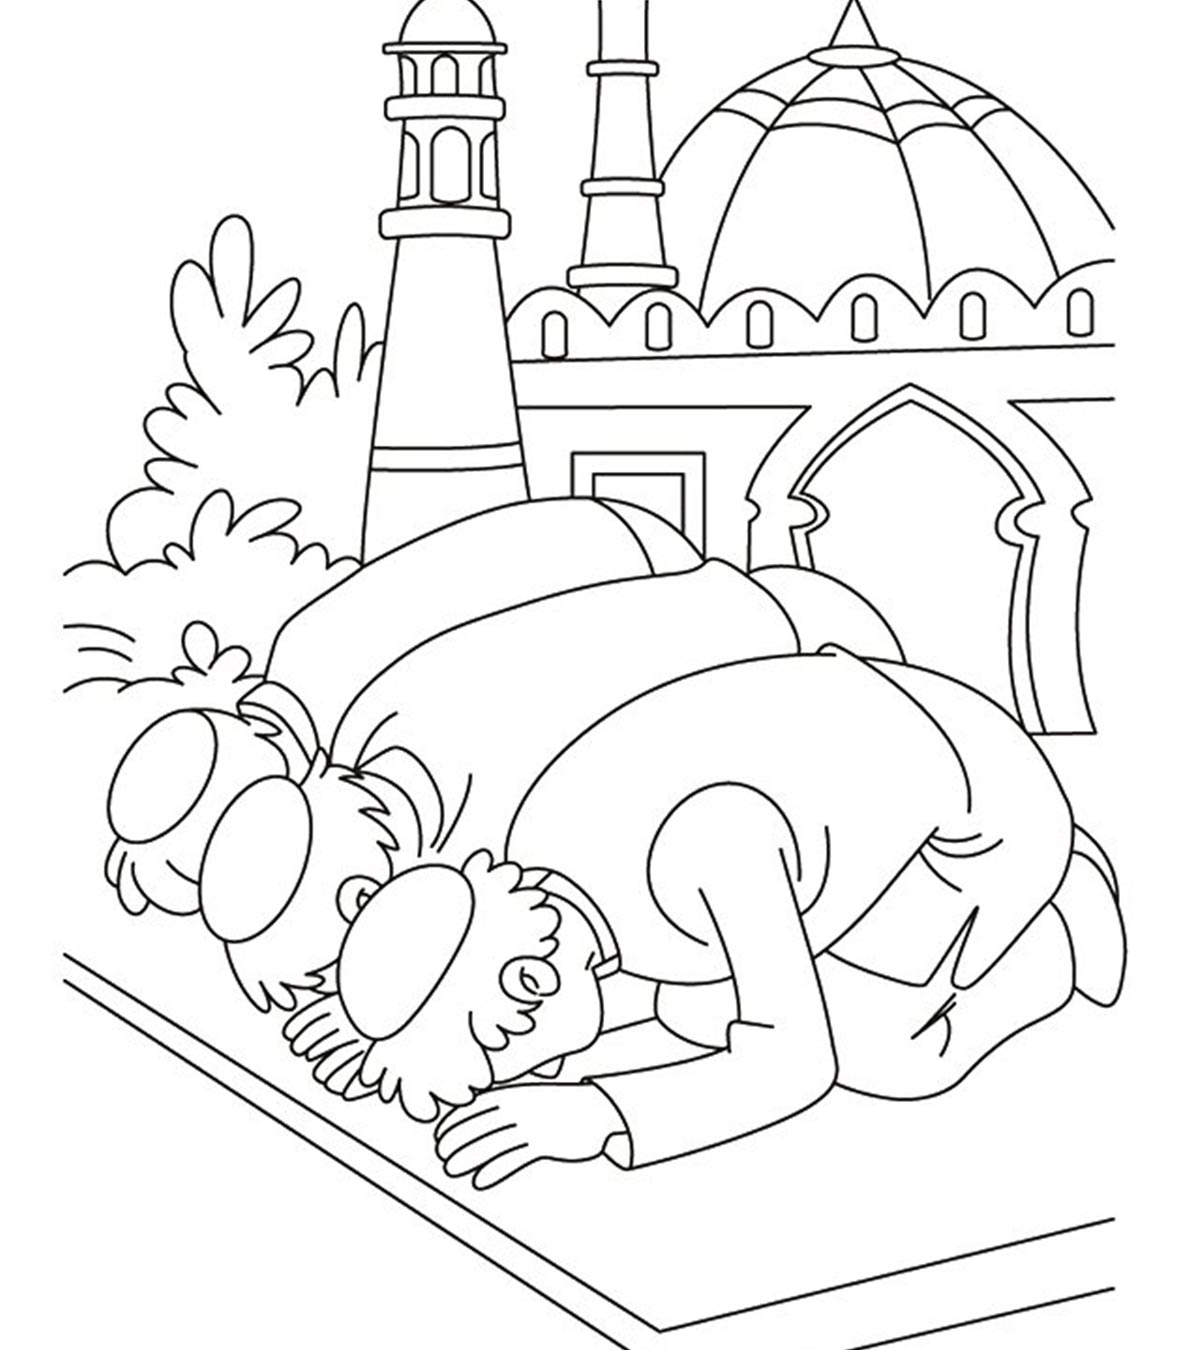 Top 10 Ramadan (Eid) Coloring Pages For Toddlers_image